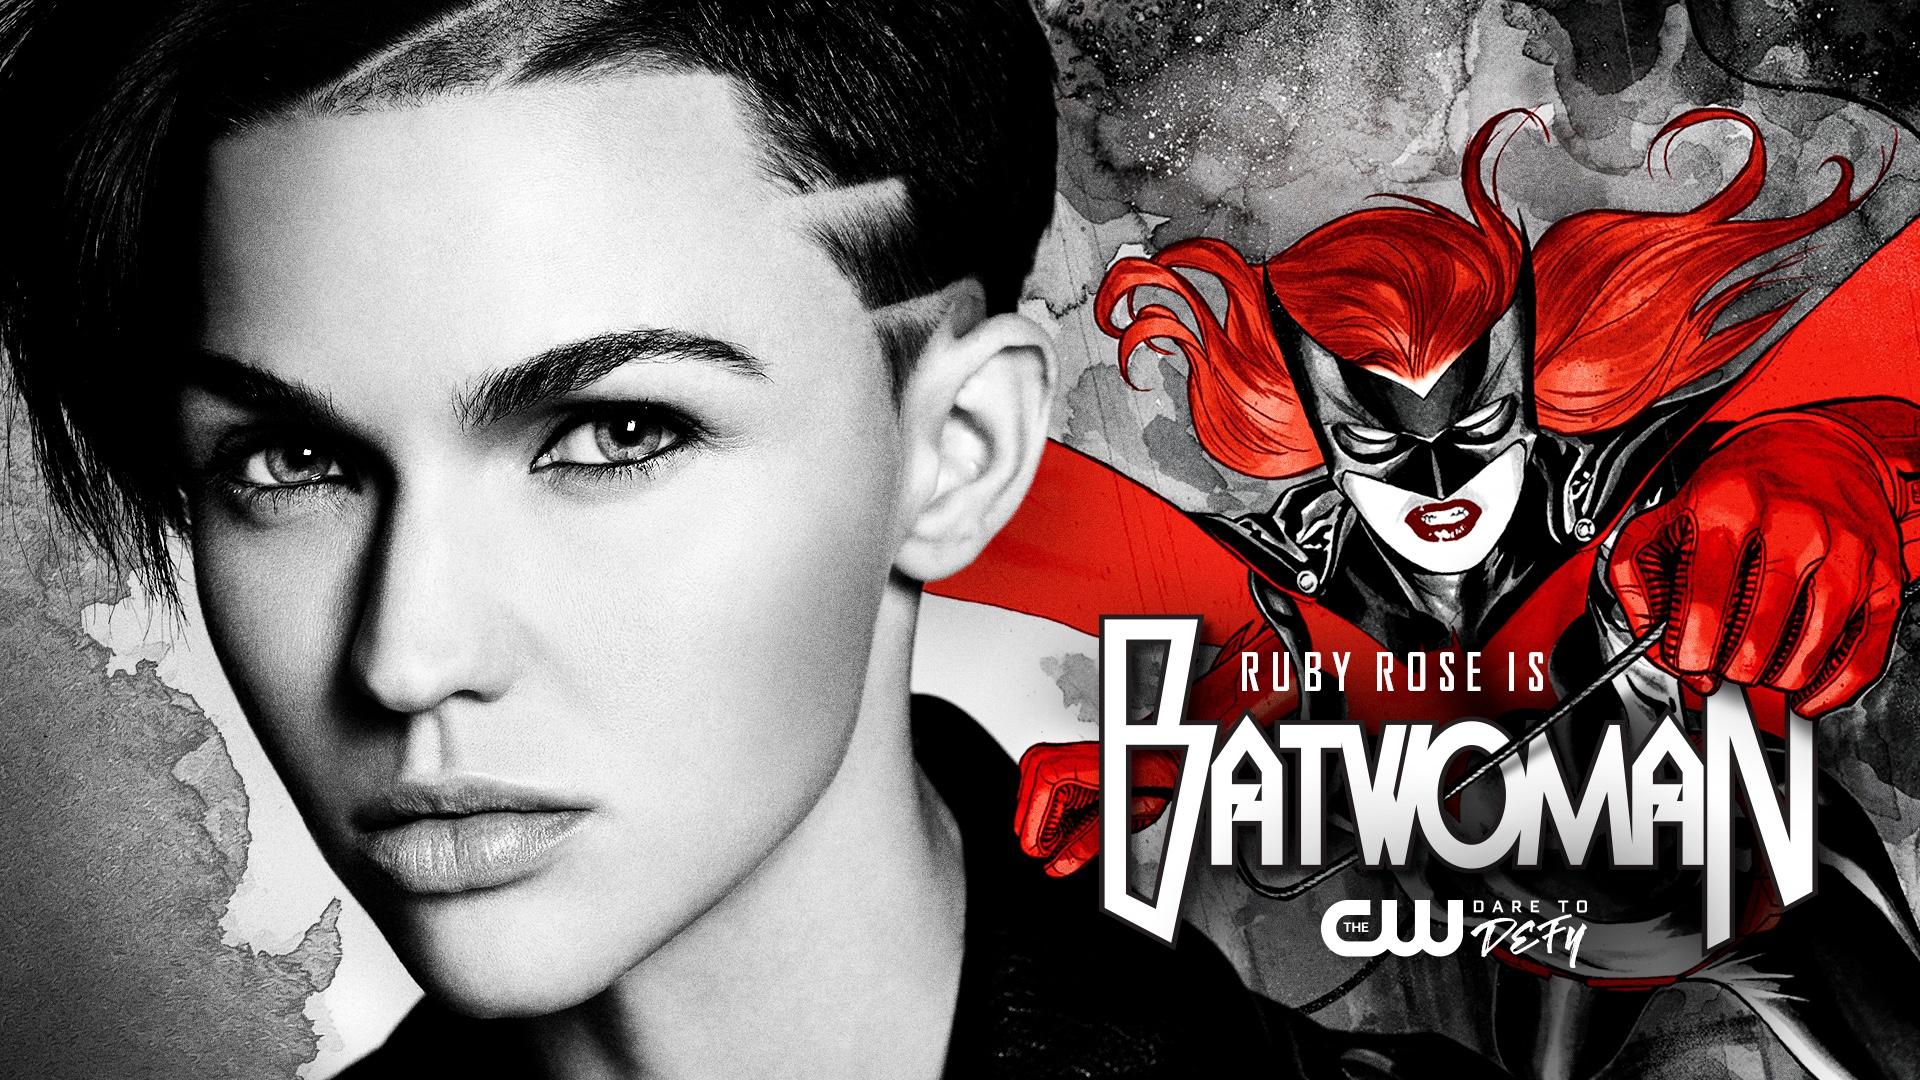 CW Releases New Image of Batwoman in Action